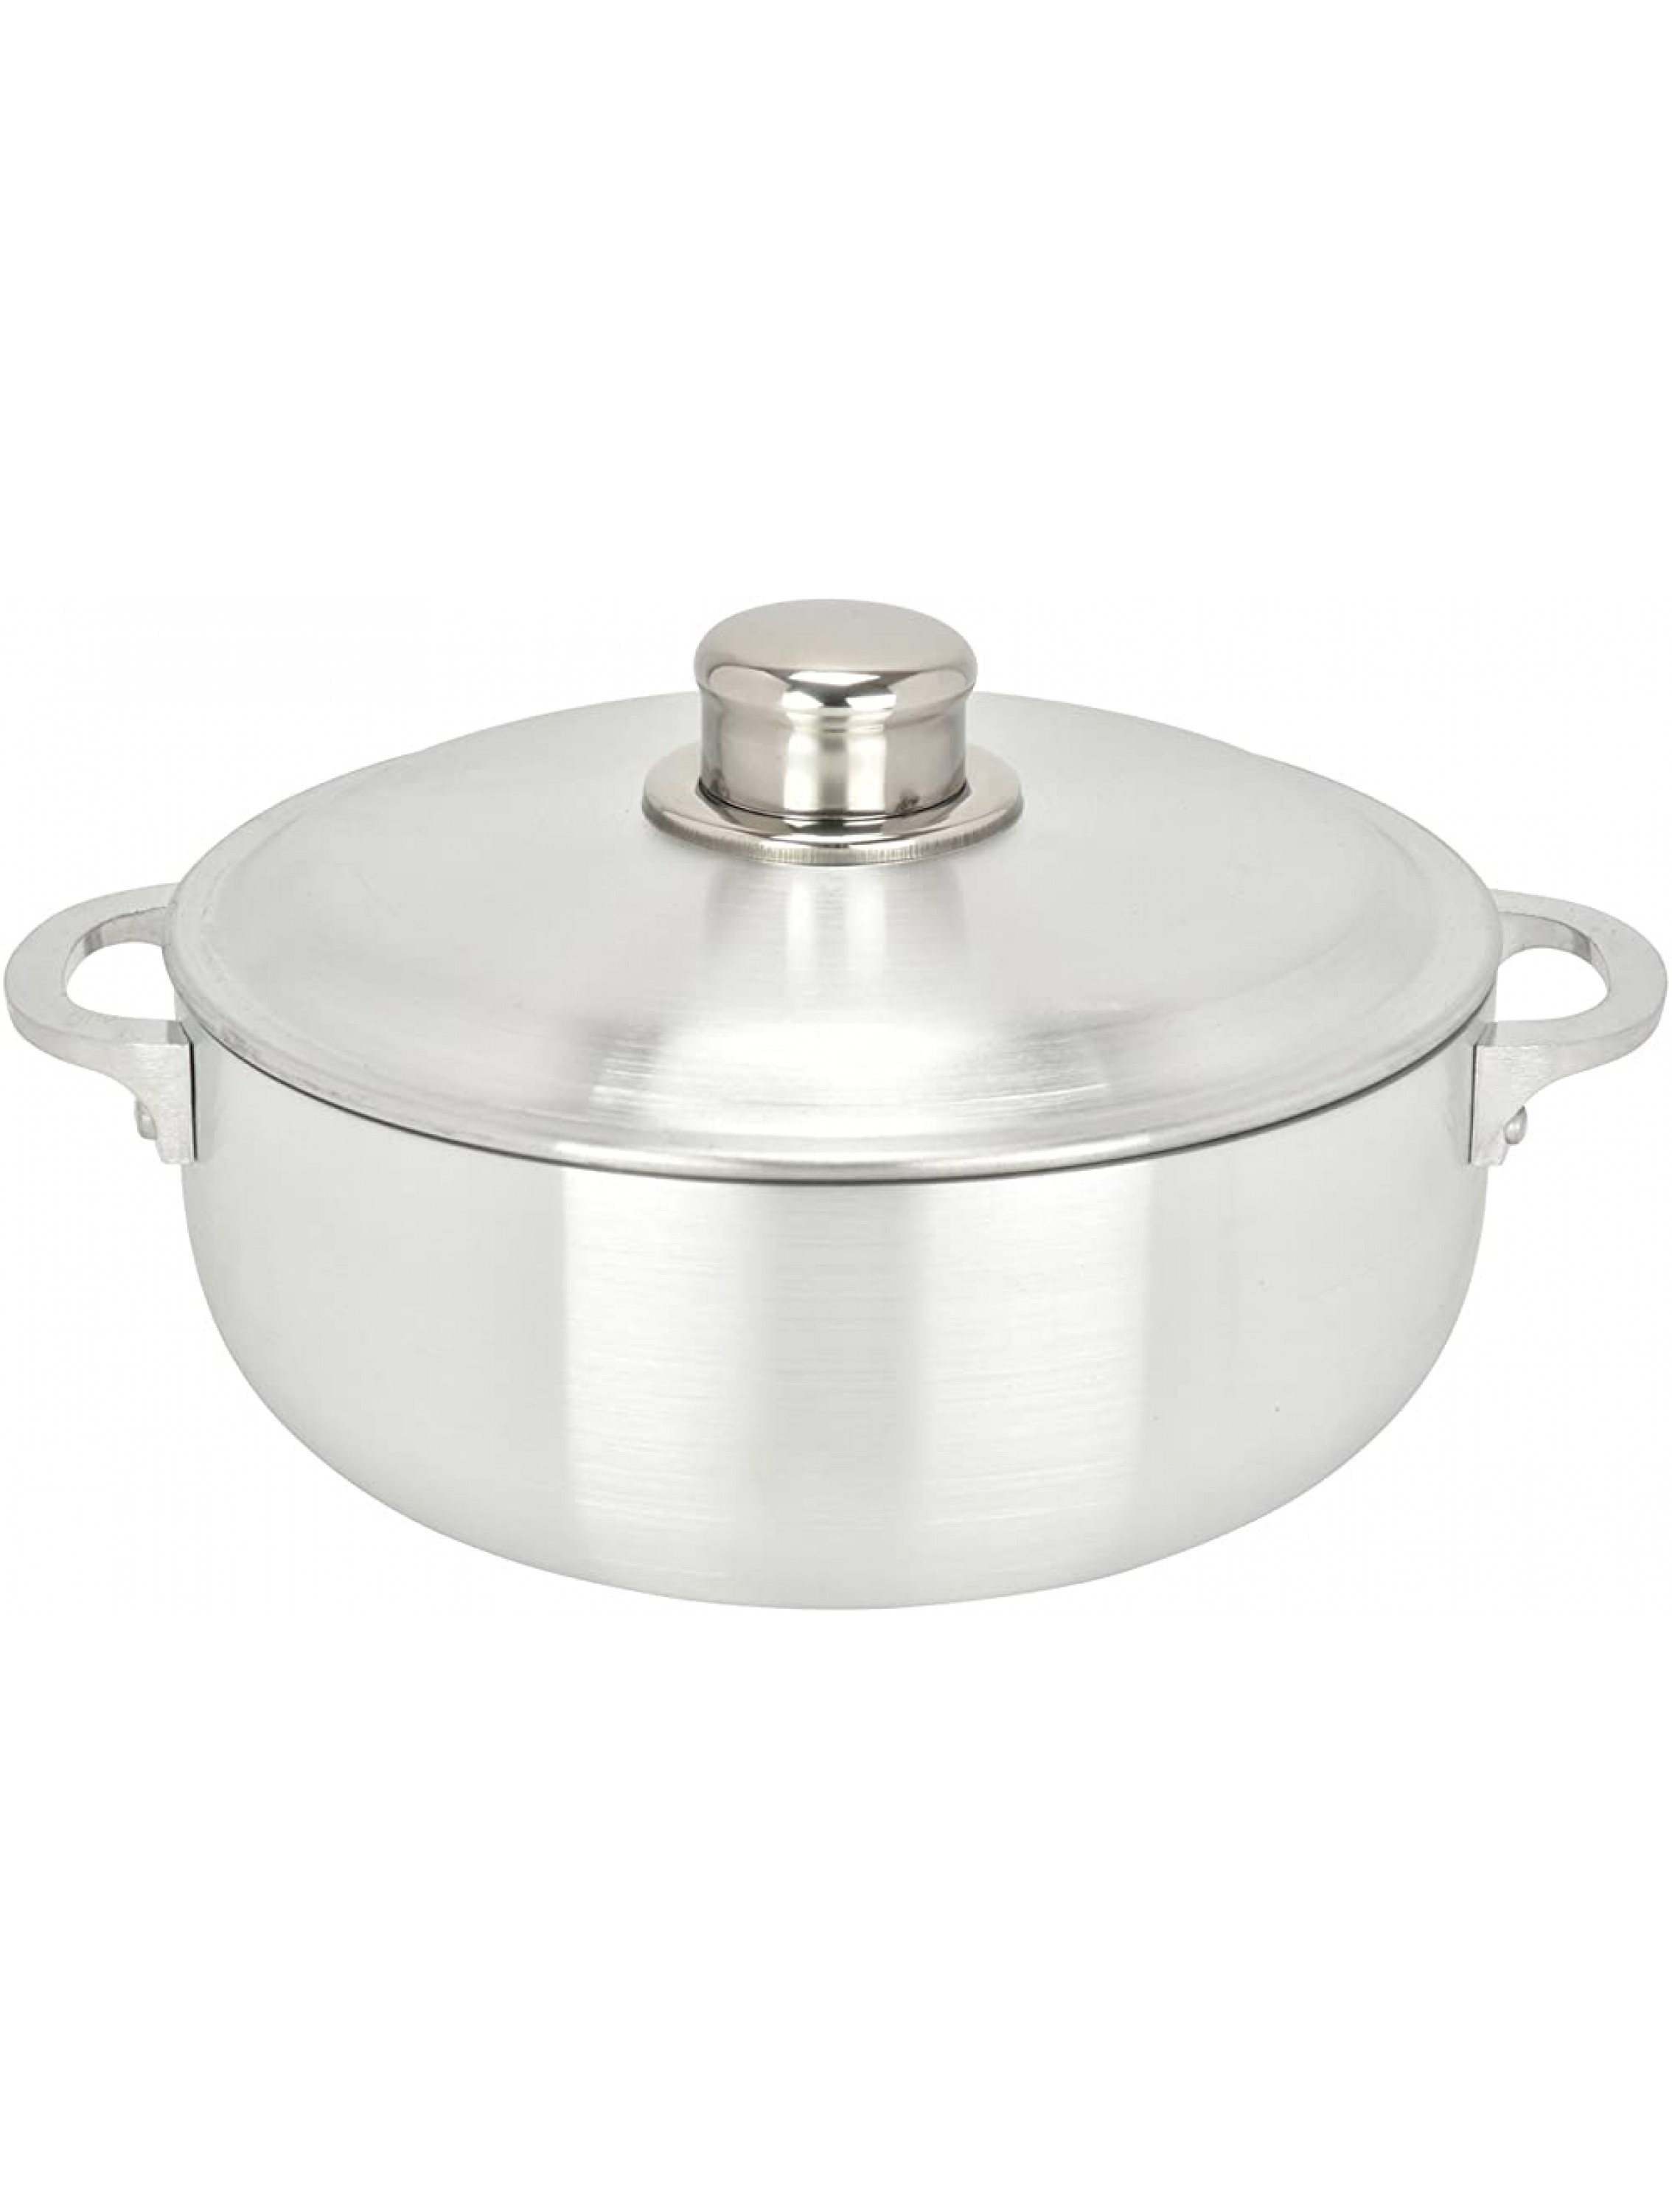 ALUMINUM CALDERO STOCK POT by Chef Pro Aluminum Superior Cooking Performance for Even Heat Distribution Perfect For Serving Large and Small Groups Riveted Handles Commercial Grade 3.8 Quart - BFFJA5Y7L